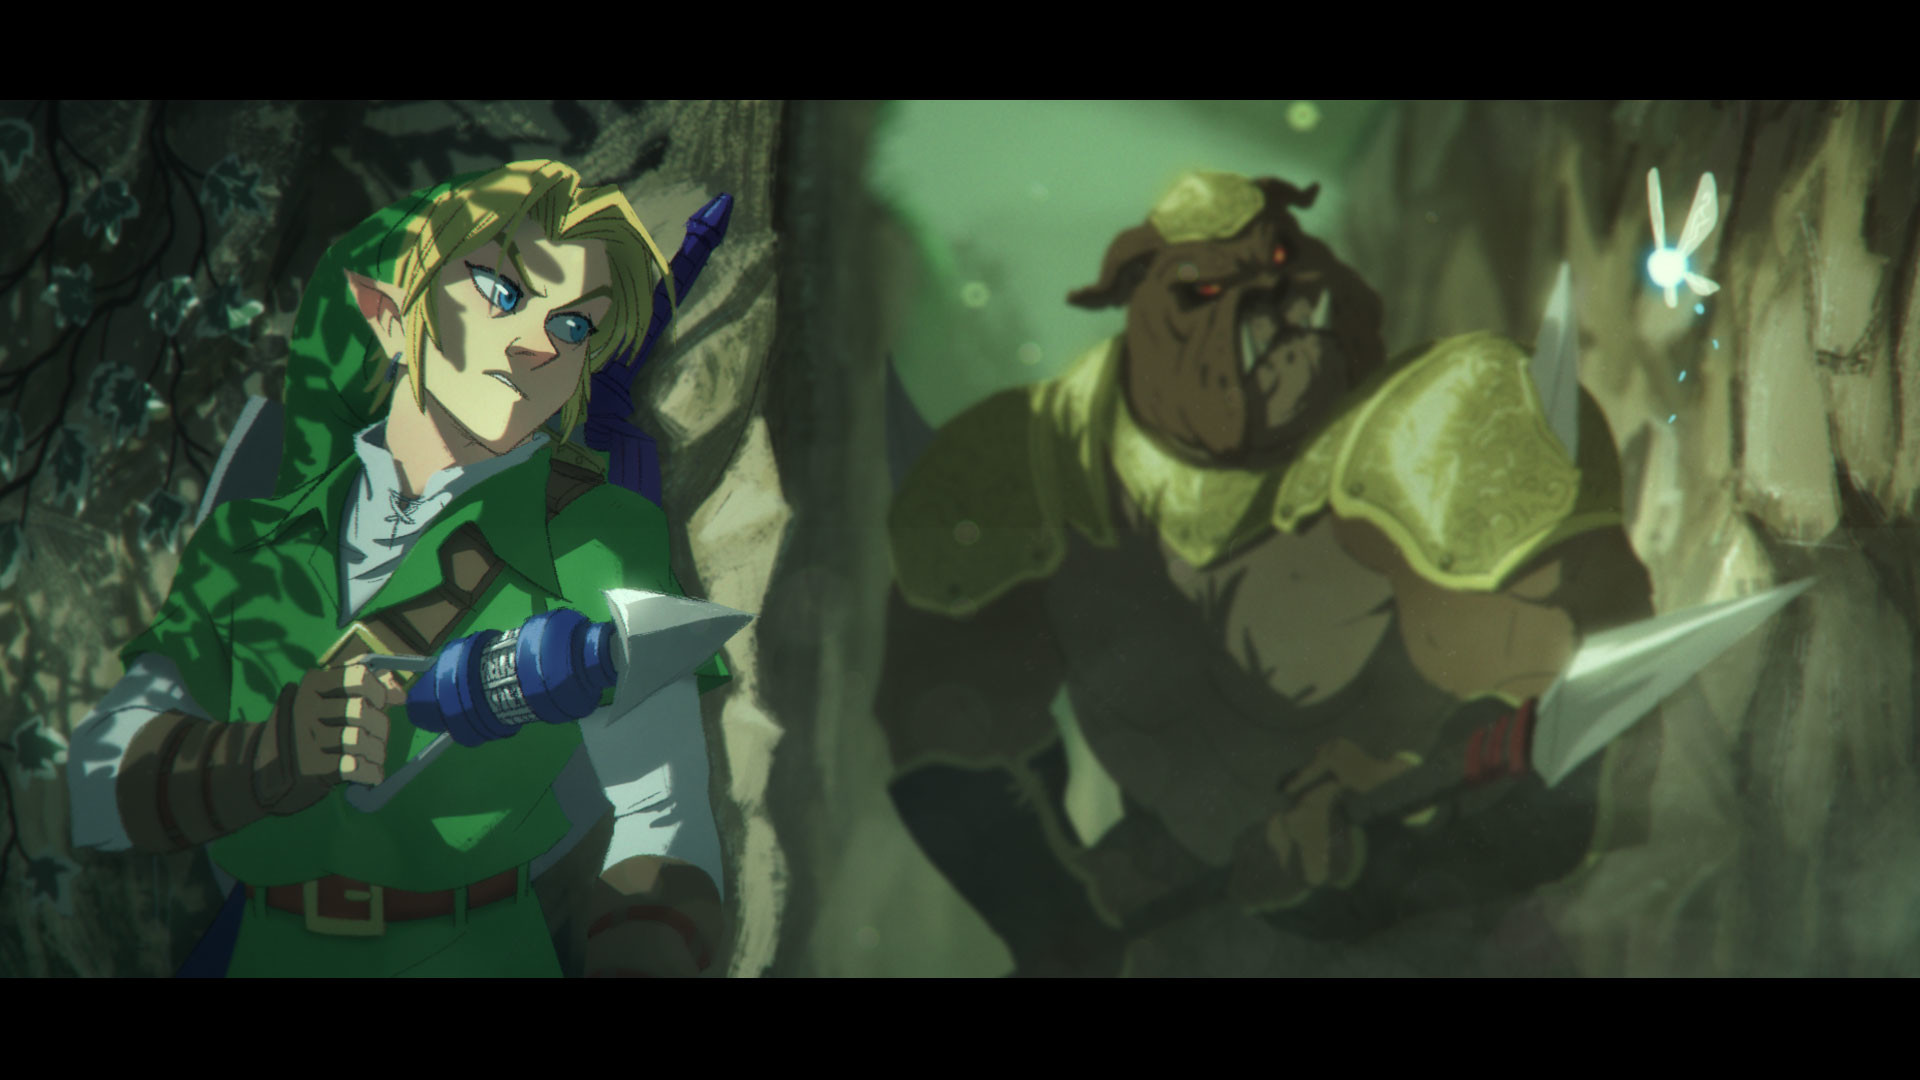 The legend of zelda wallpapers and gaming art. on Tumblr